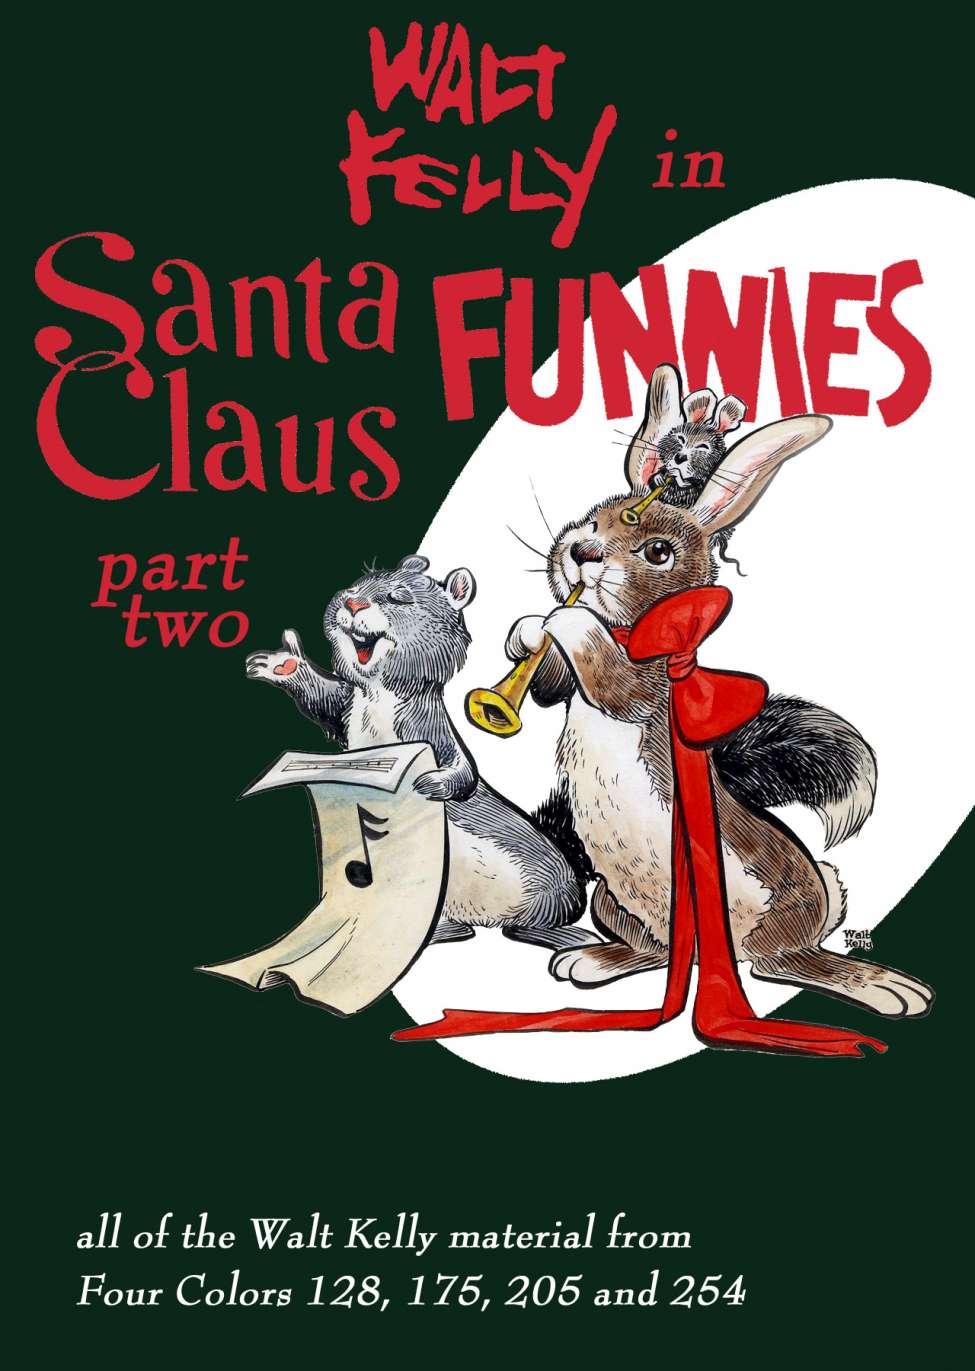 Comic Book Cover For Walt Kelly in Santa Claus Funnies 1942-1949 - Part 2